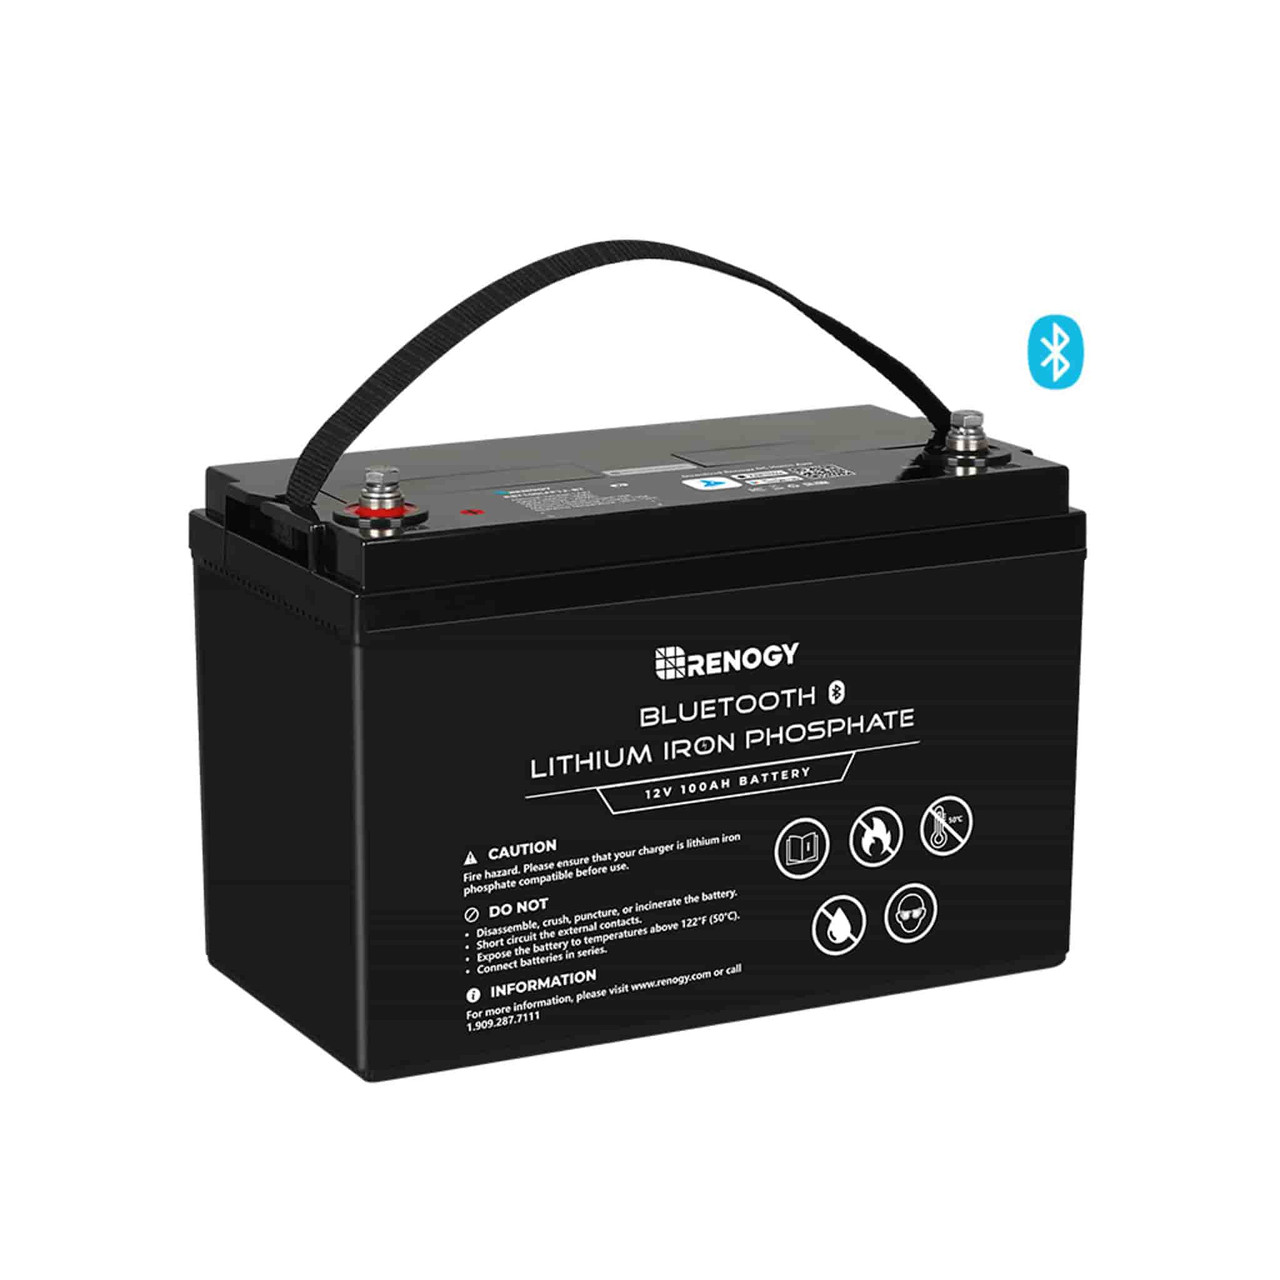 12V 40A DC to DC Battery Charger